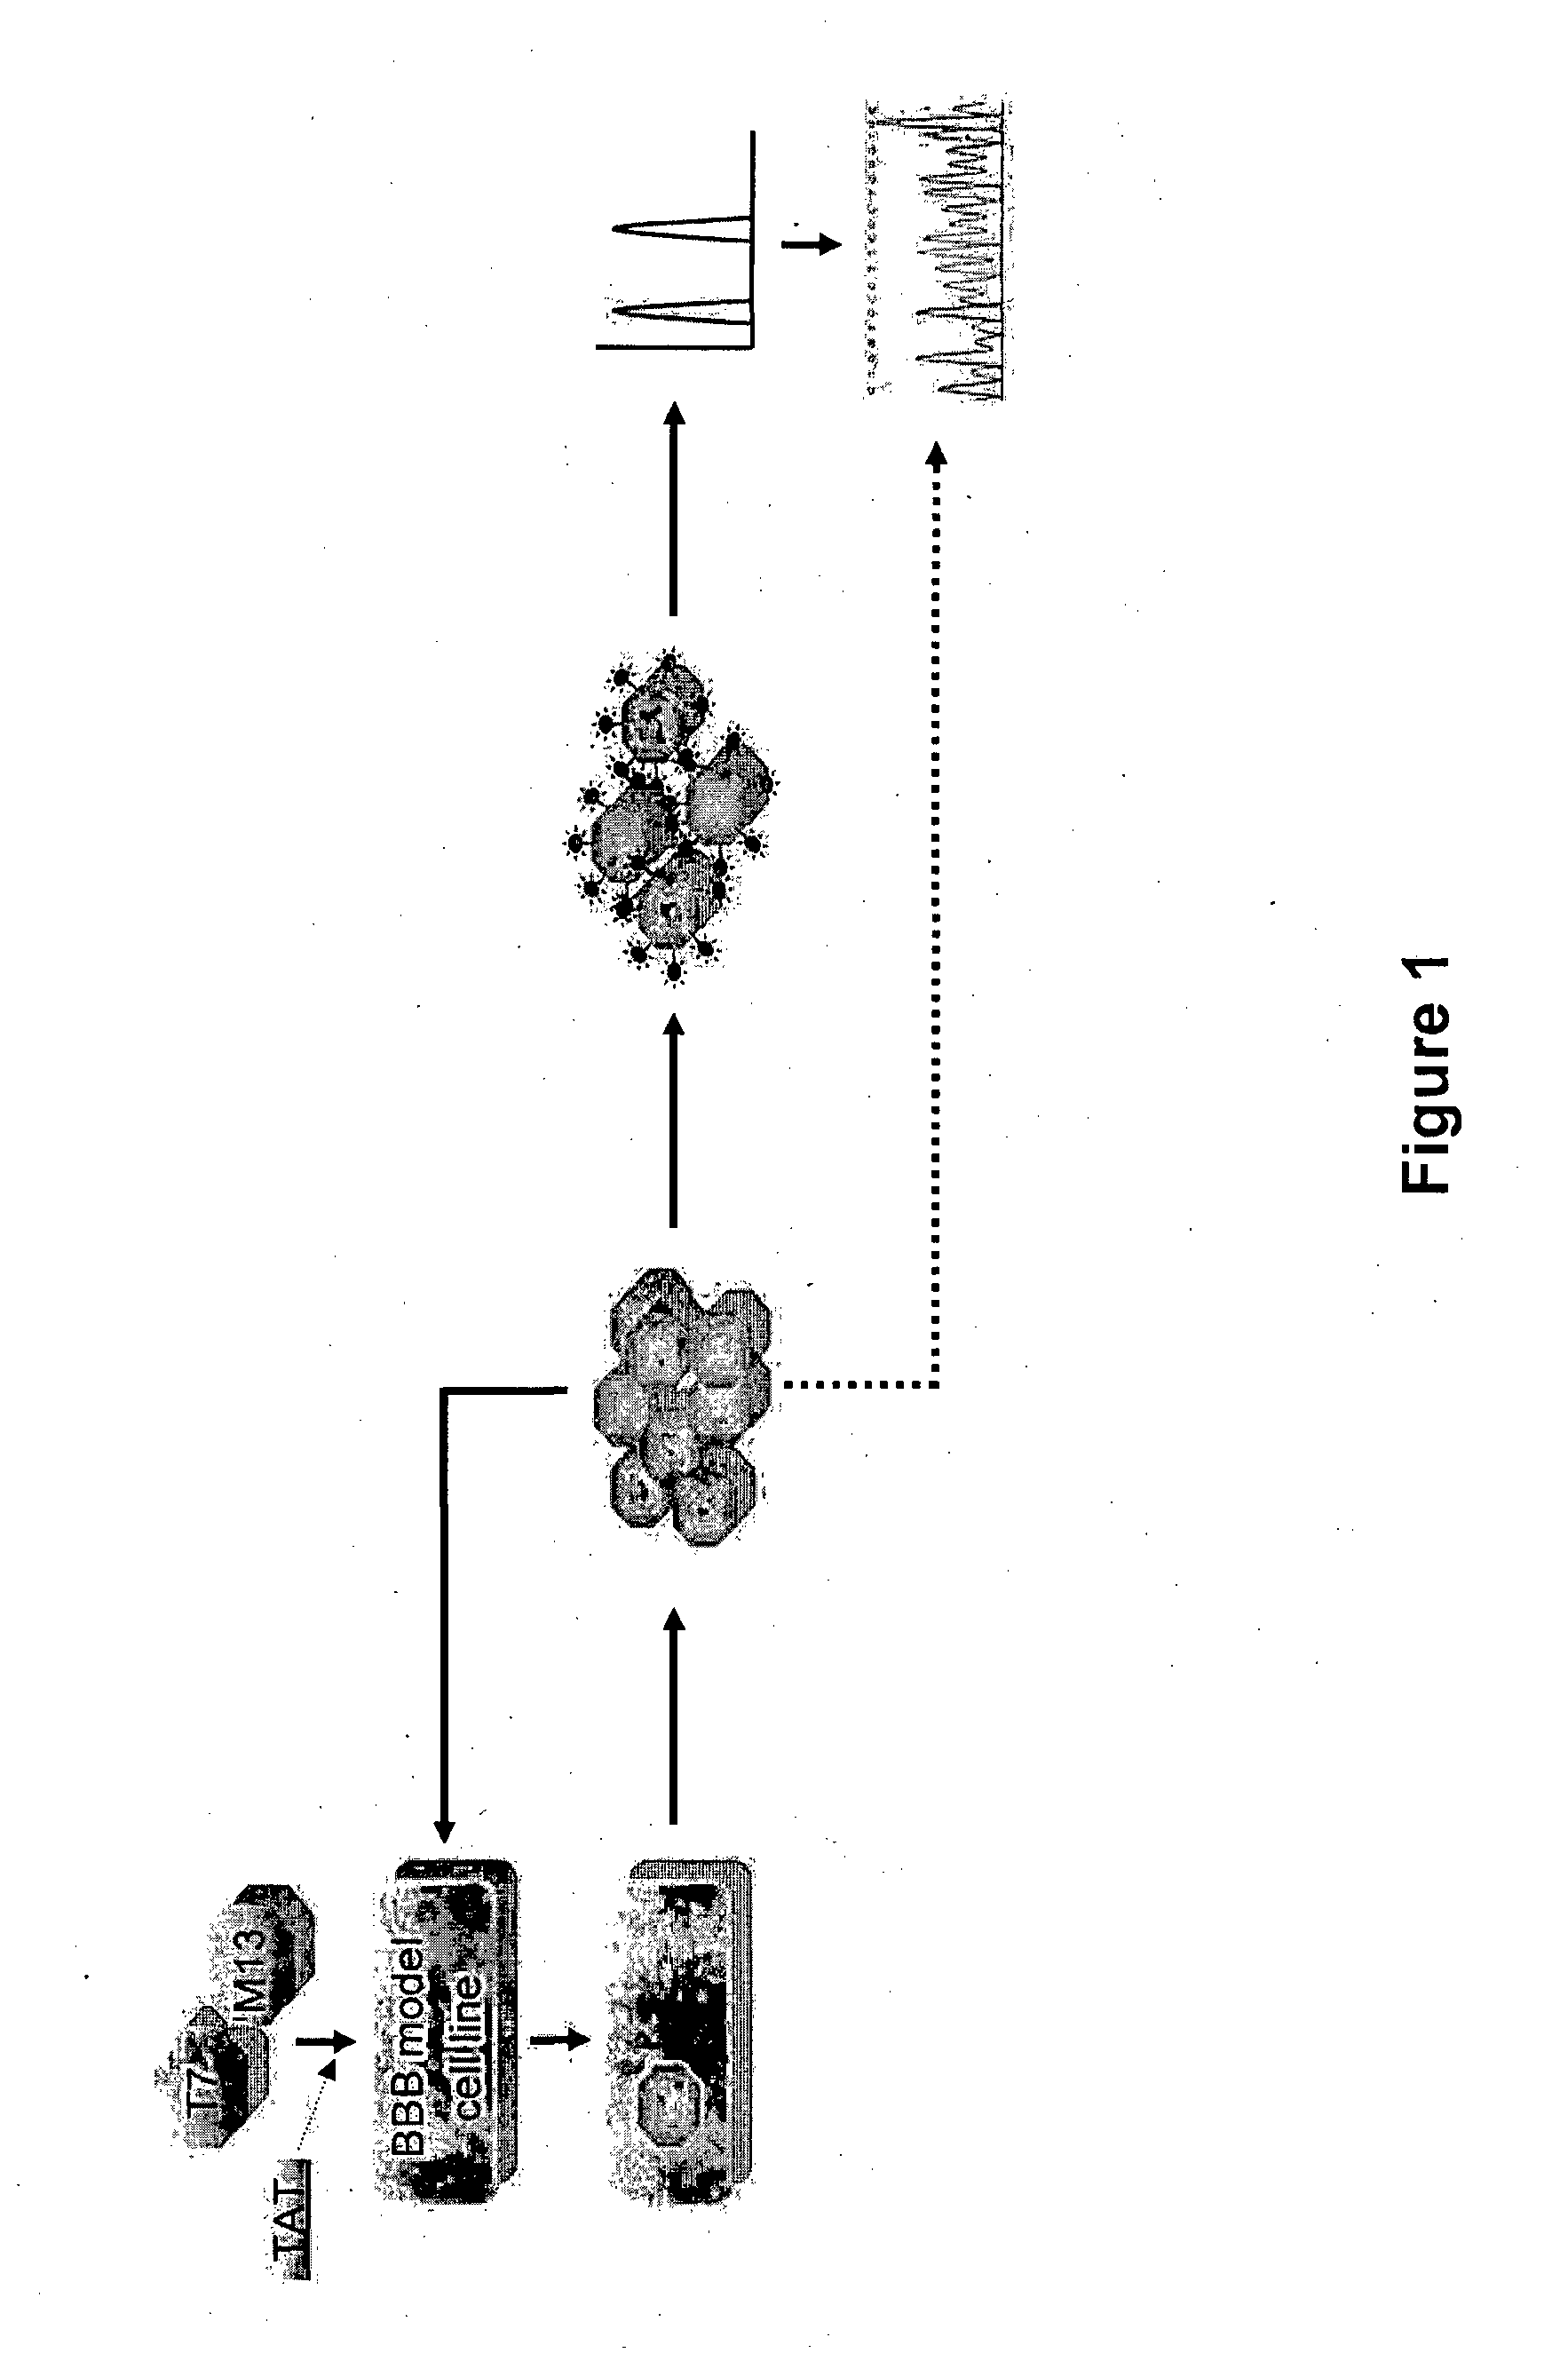 Method of Determining, Identifying or Isolating Cell-Penetrating Peptides